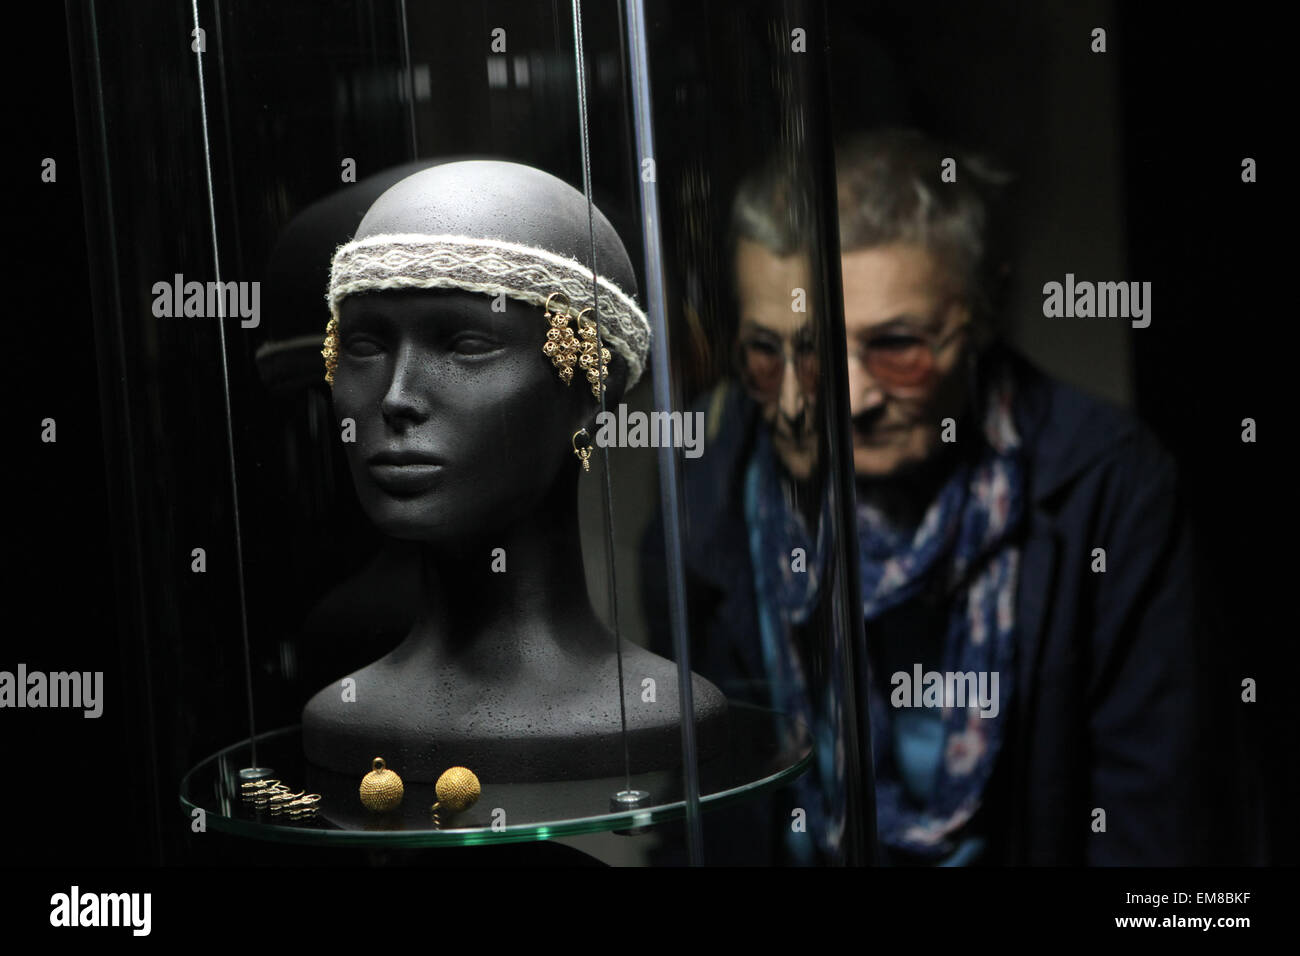 Prague, Czech Republic. 16th April 2015. A visitor examines Great Moravian golden jewellery during a press preview to the exhibition 'Great Moravia and the Beginnings of Christianity' in Prague, Czech Republic. The exhibition presenting medieval treasures and original artefacts of the first Slavic state runs in Prague Castle till June 28, 2015. Stock Photo